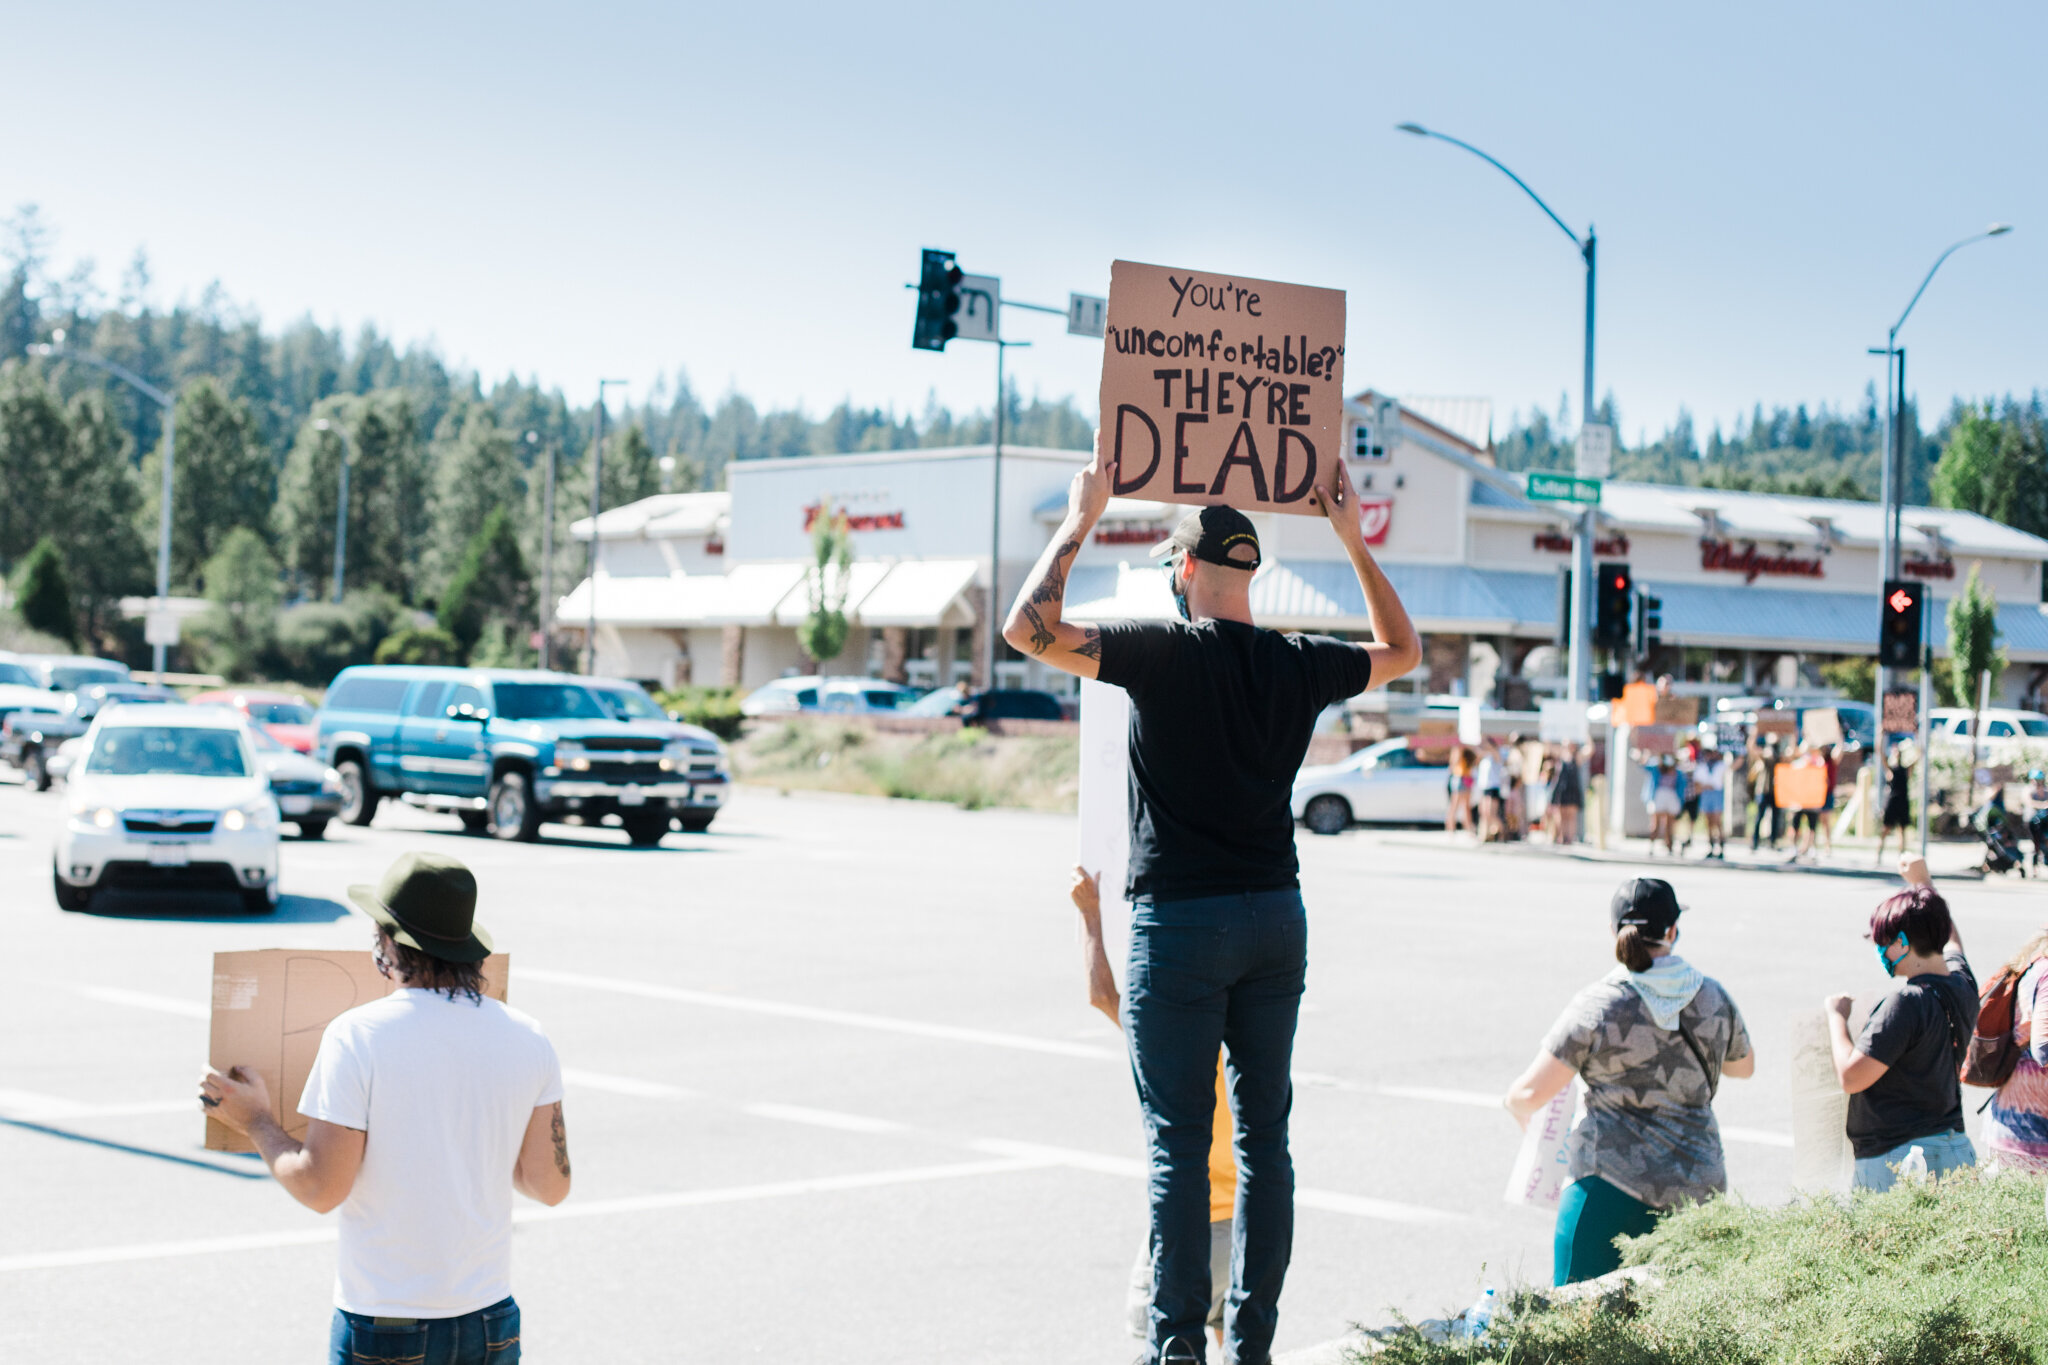 Peaceful Demonstration in Rural Grass Valley, California Protest photographed by Lenka Vodicka